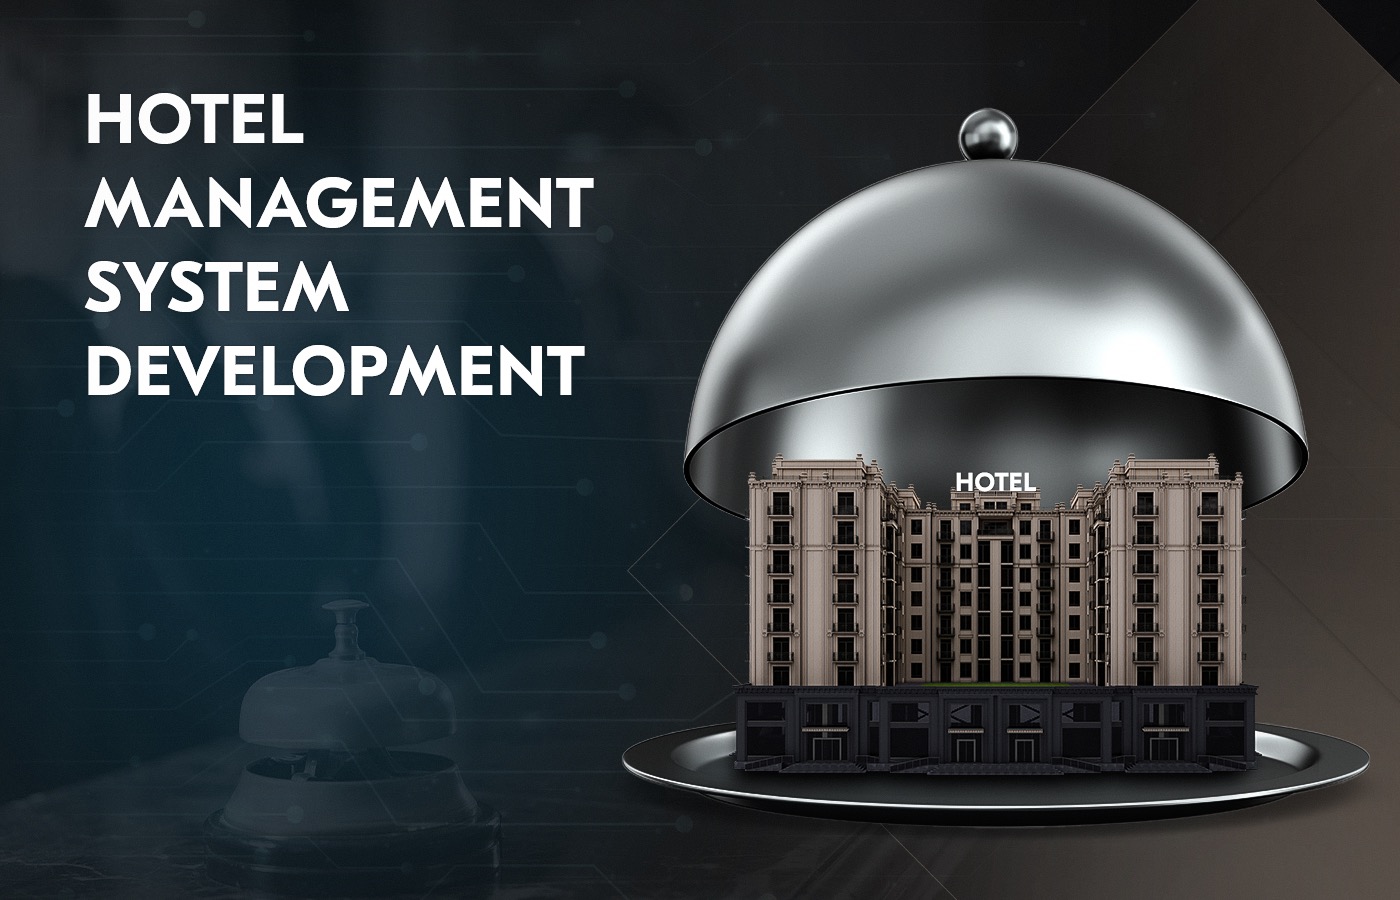 Hotel management system development for hospitality industry